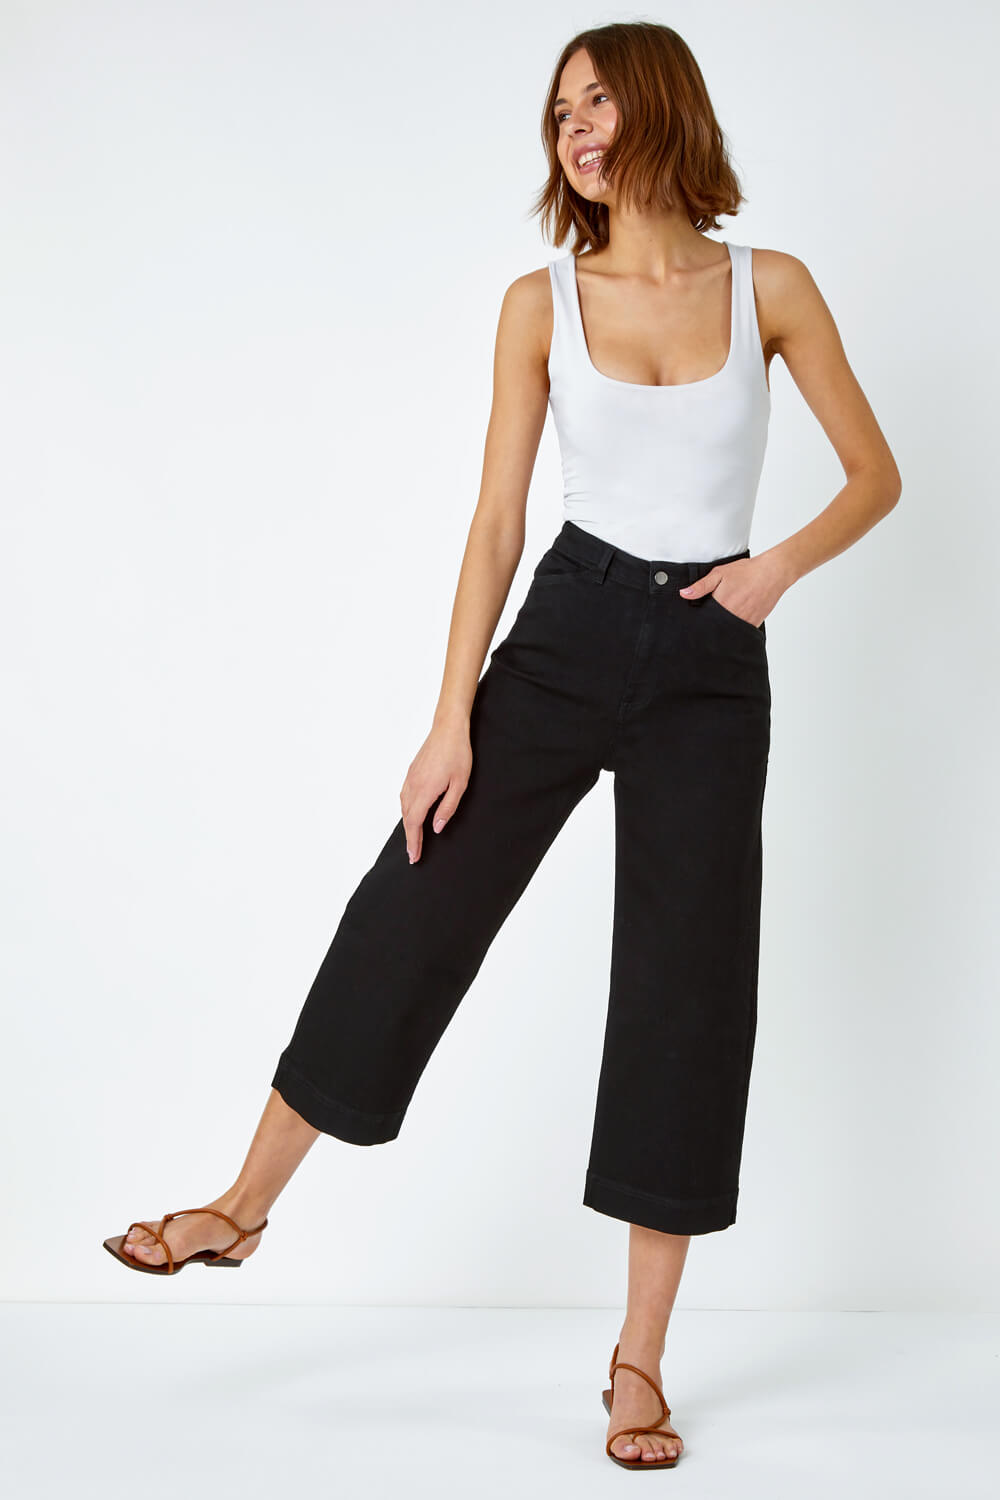 Was really hoping the black wide leg align pants would be right up